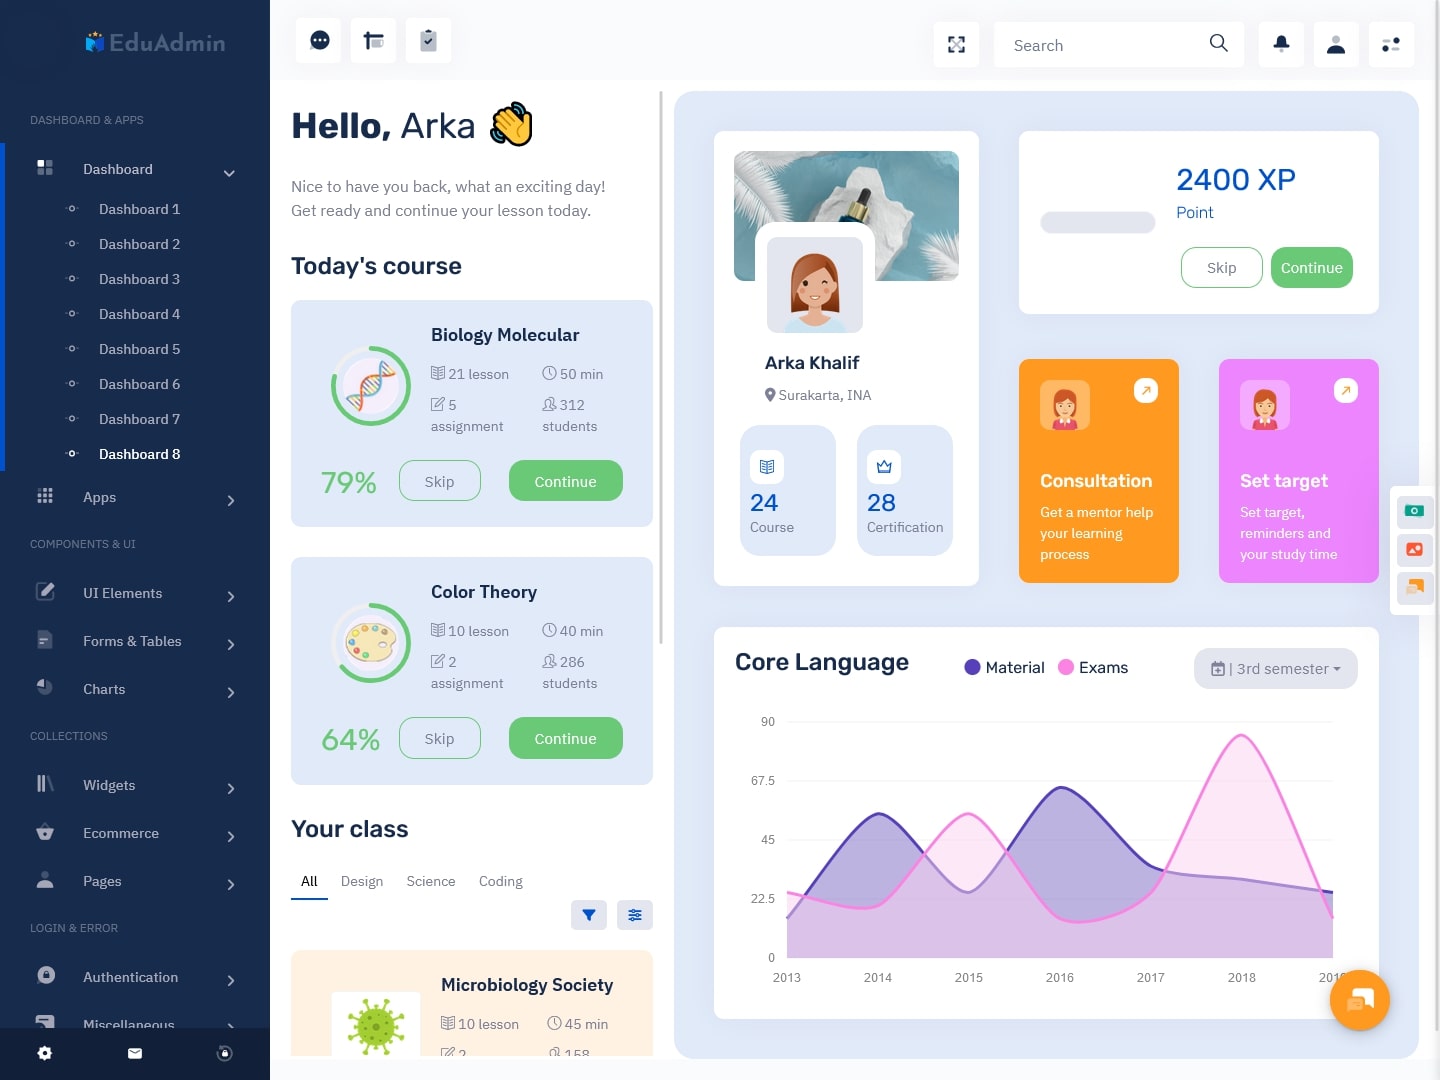 LMS Dashboard Template